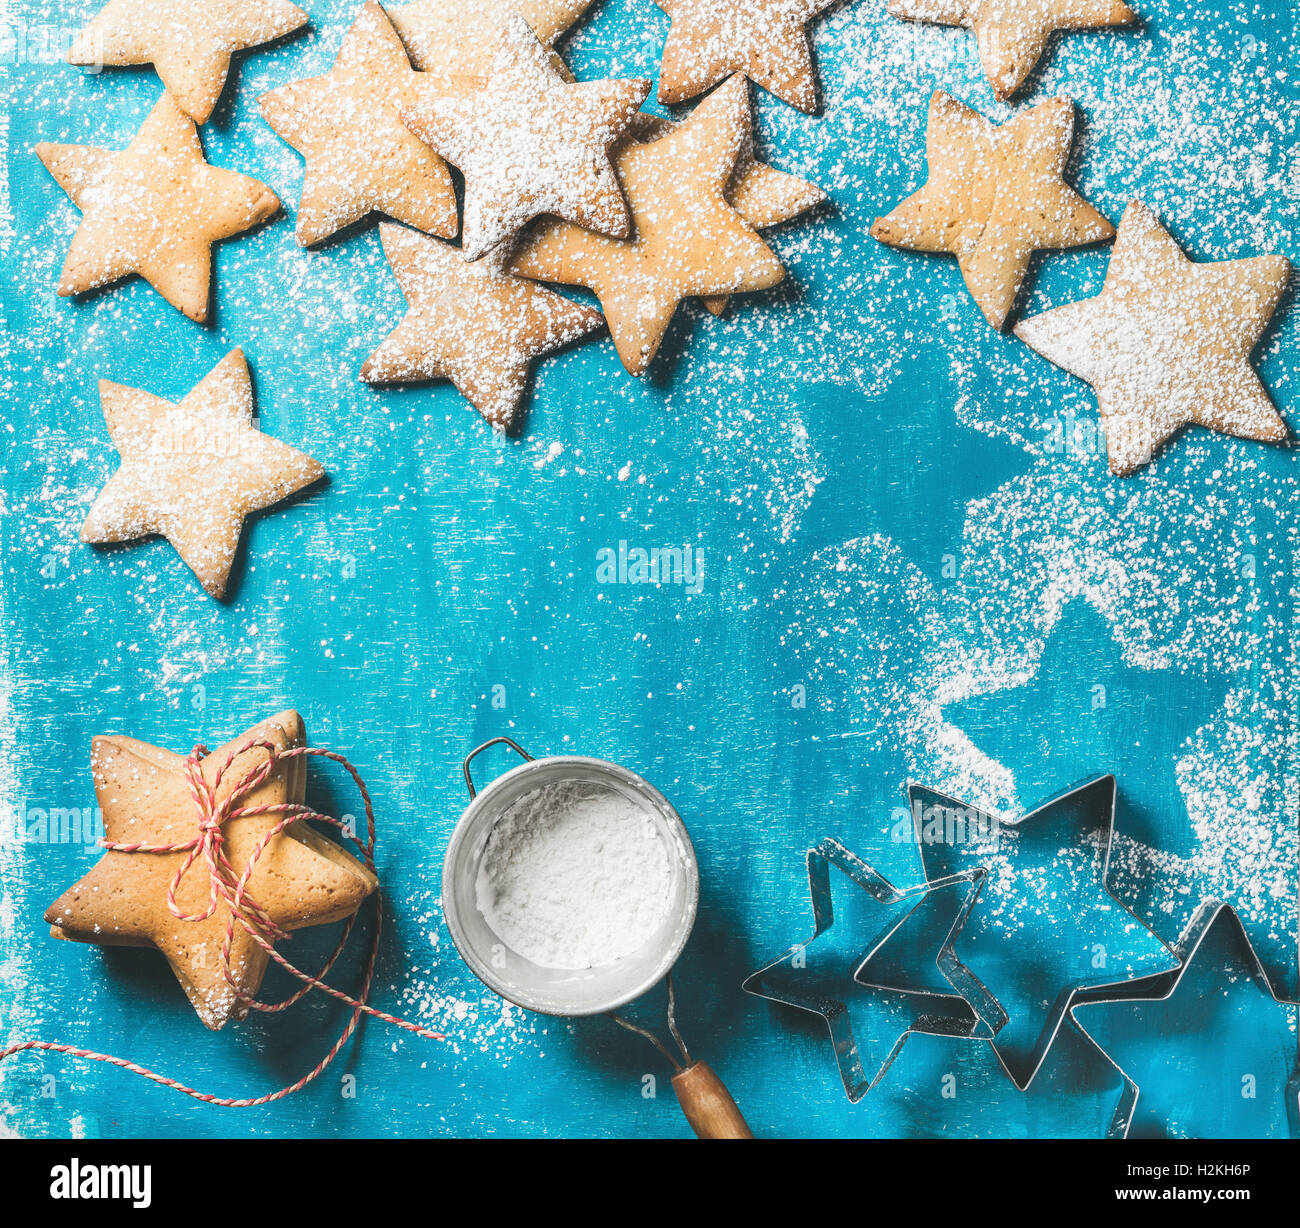 Christmas or New Year holiday food background. Sweet gingerbread cookies in shape of star with sugar powder on bright blue paint Stock Photo